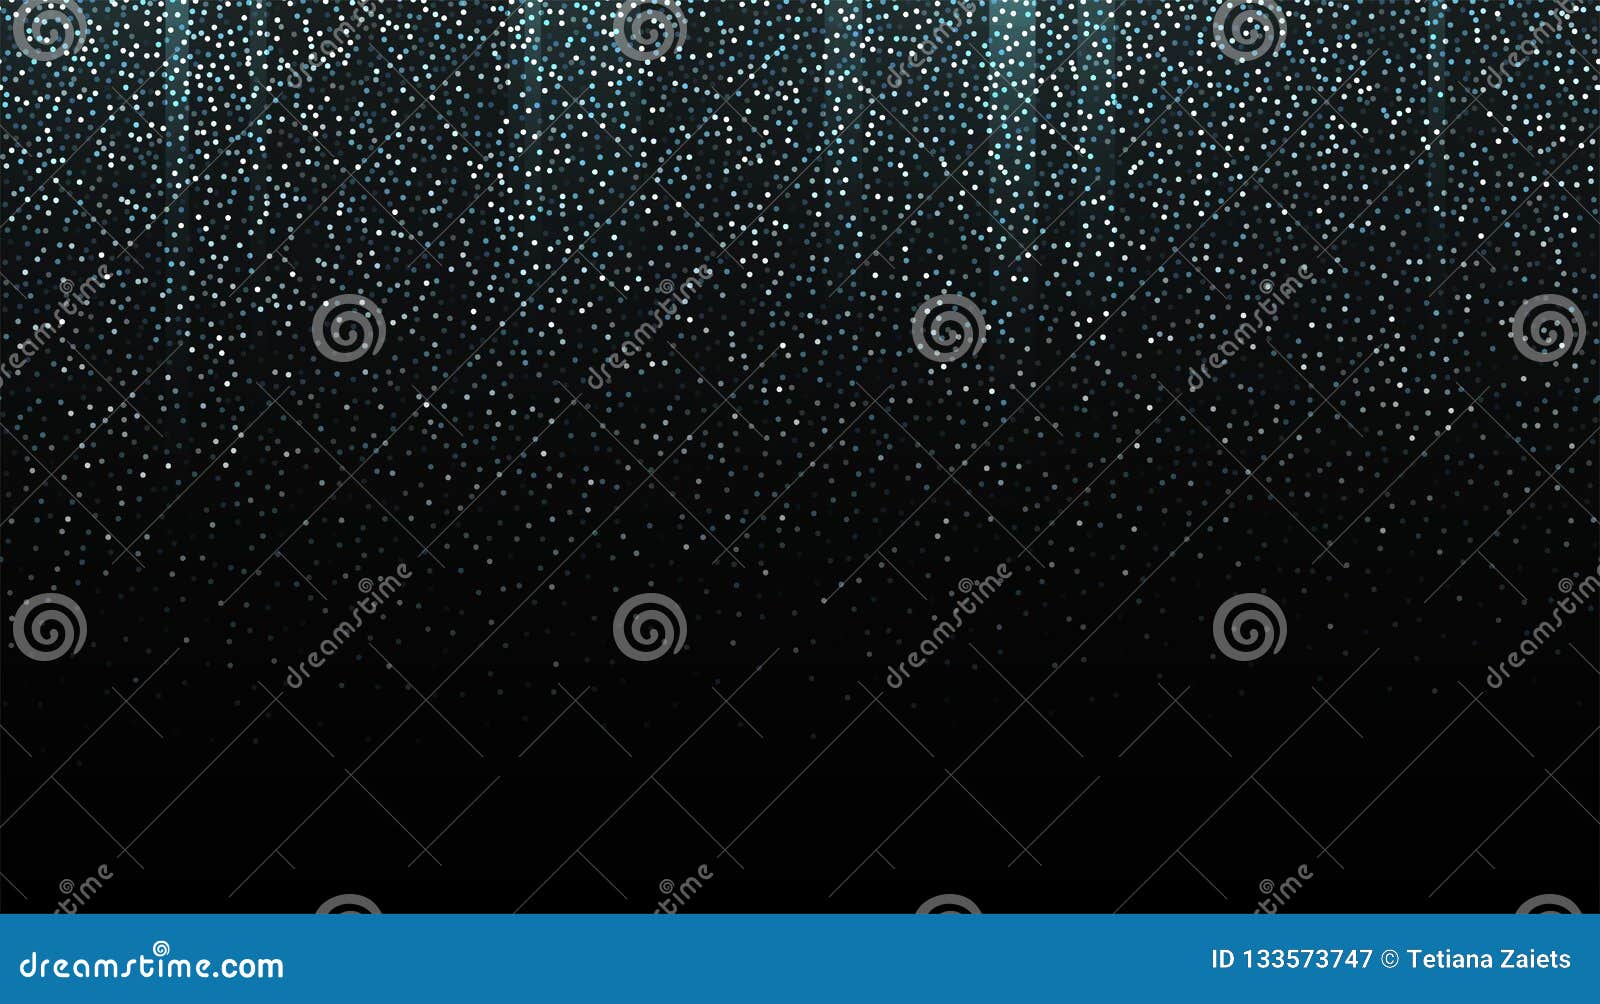 silver glitter seamless border on black background. glittering falling confetti backdrop. argent shimmer texture for